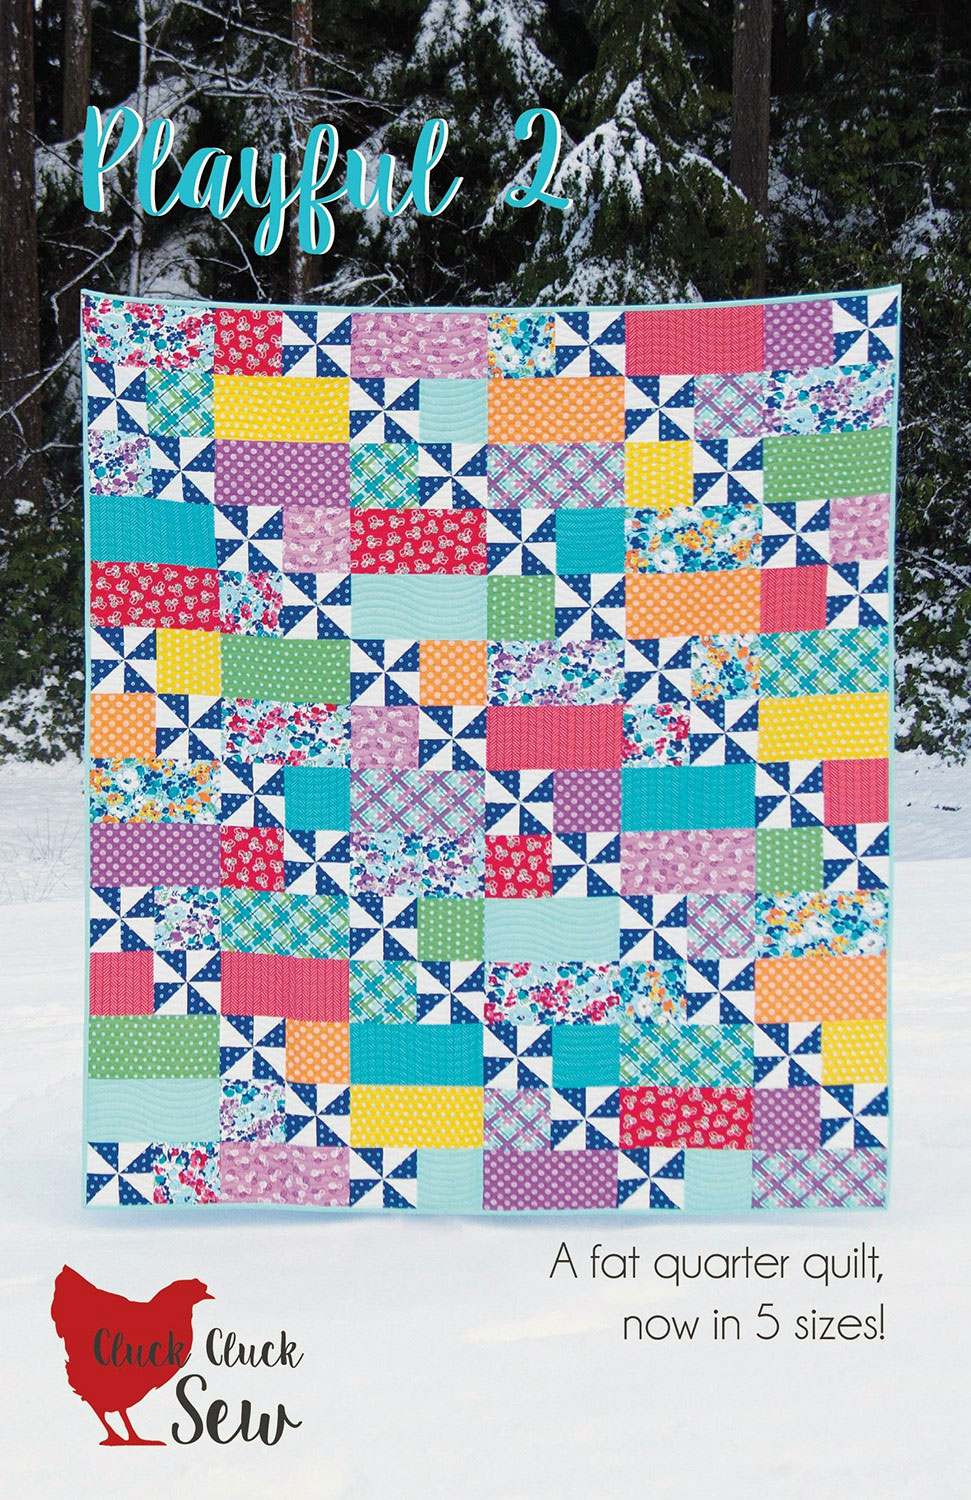 Playful-2-quilt-sewing-pattern-Cluck-Cluck-Sew-front